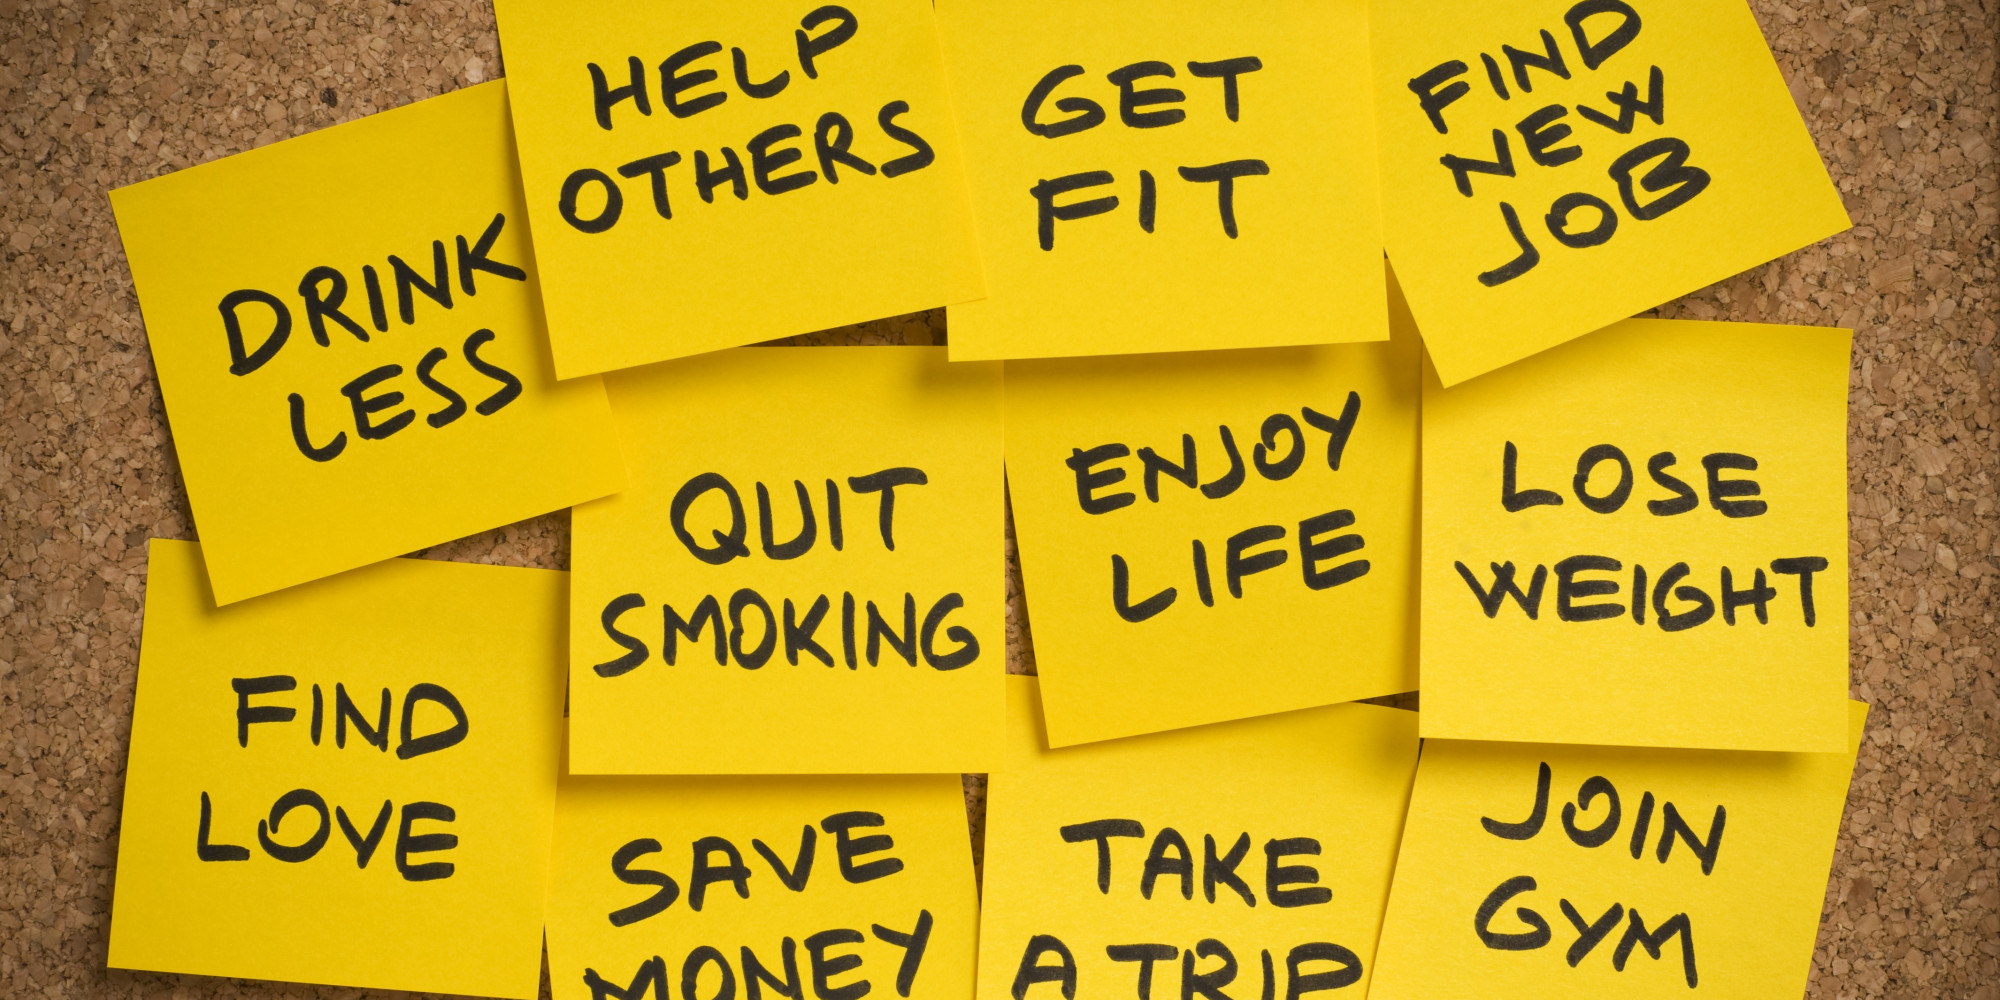 Psychologists Find The Best Way To Achieve New Years Resolutions Is 